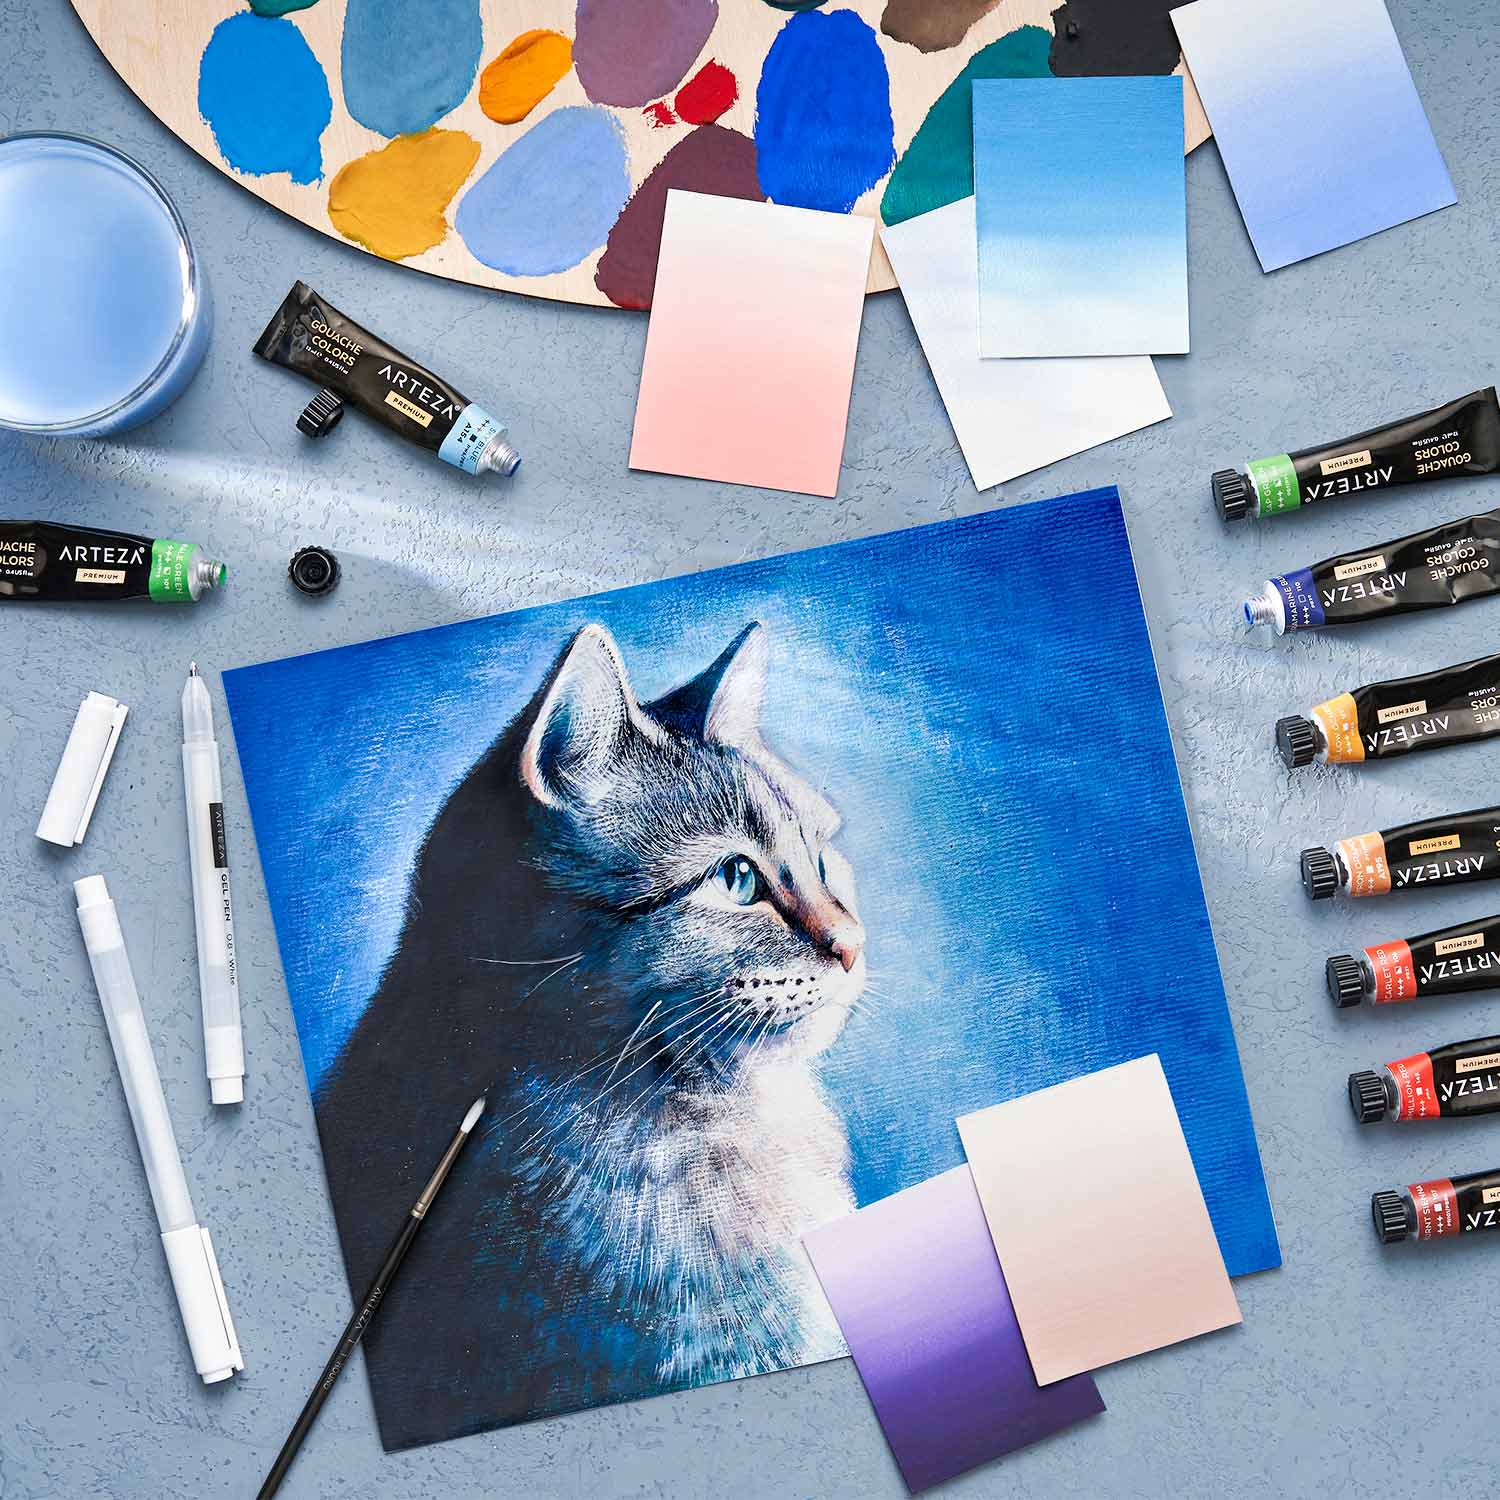 ARTEZA PREMIUM ART SUPPLIES on Instagram: ✨Gouache is here to sprinkle  magic onto your canvases once again! 🎨⁠ ⁠ #Arteza #ArtezaGouache  #GouachePaint